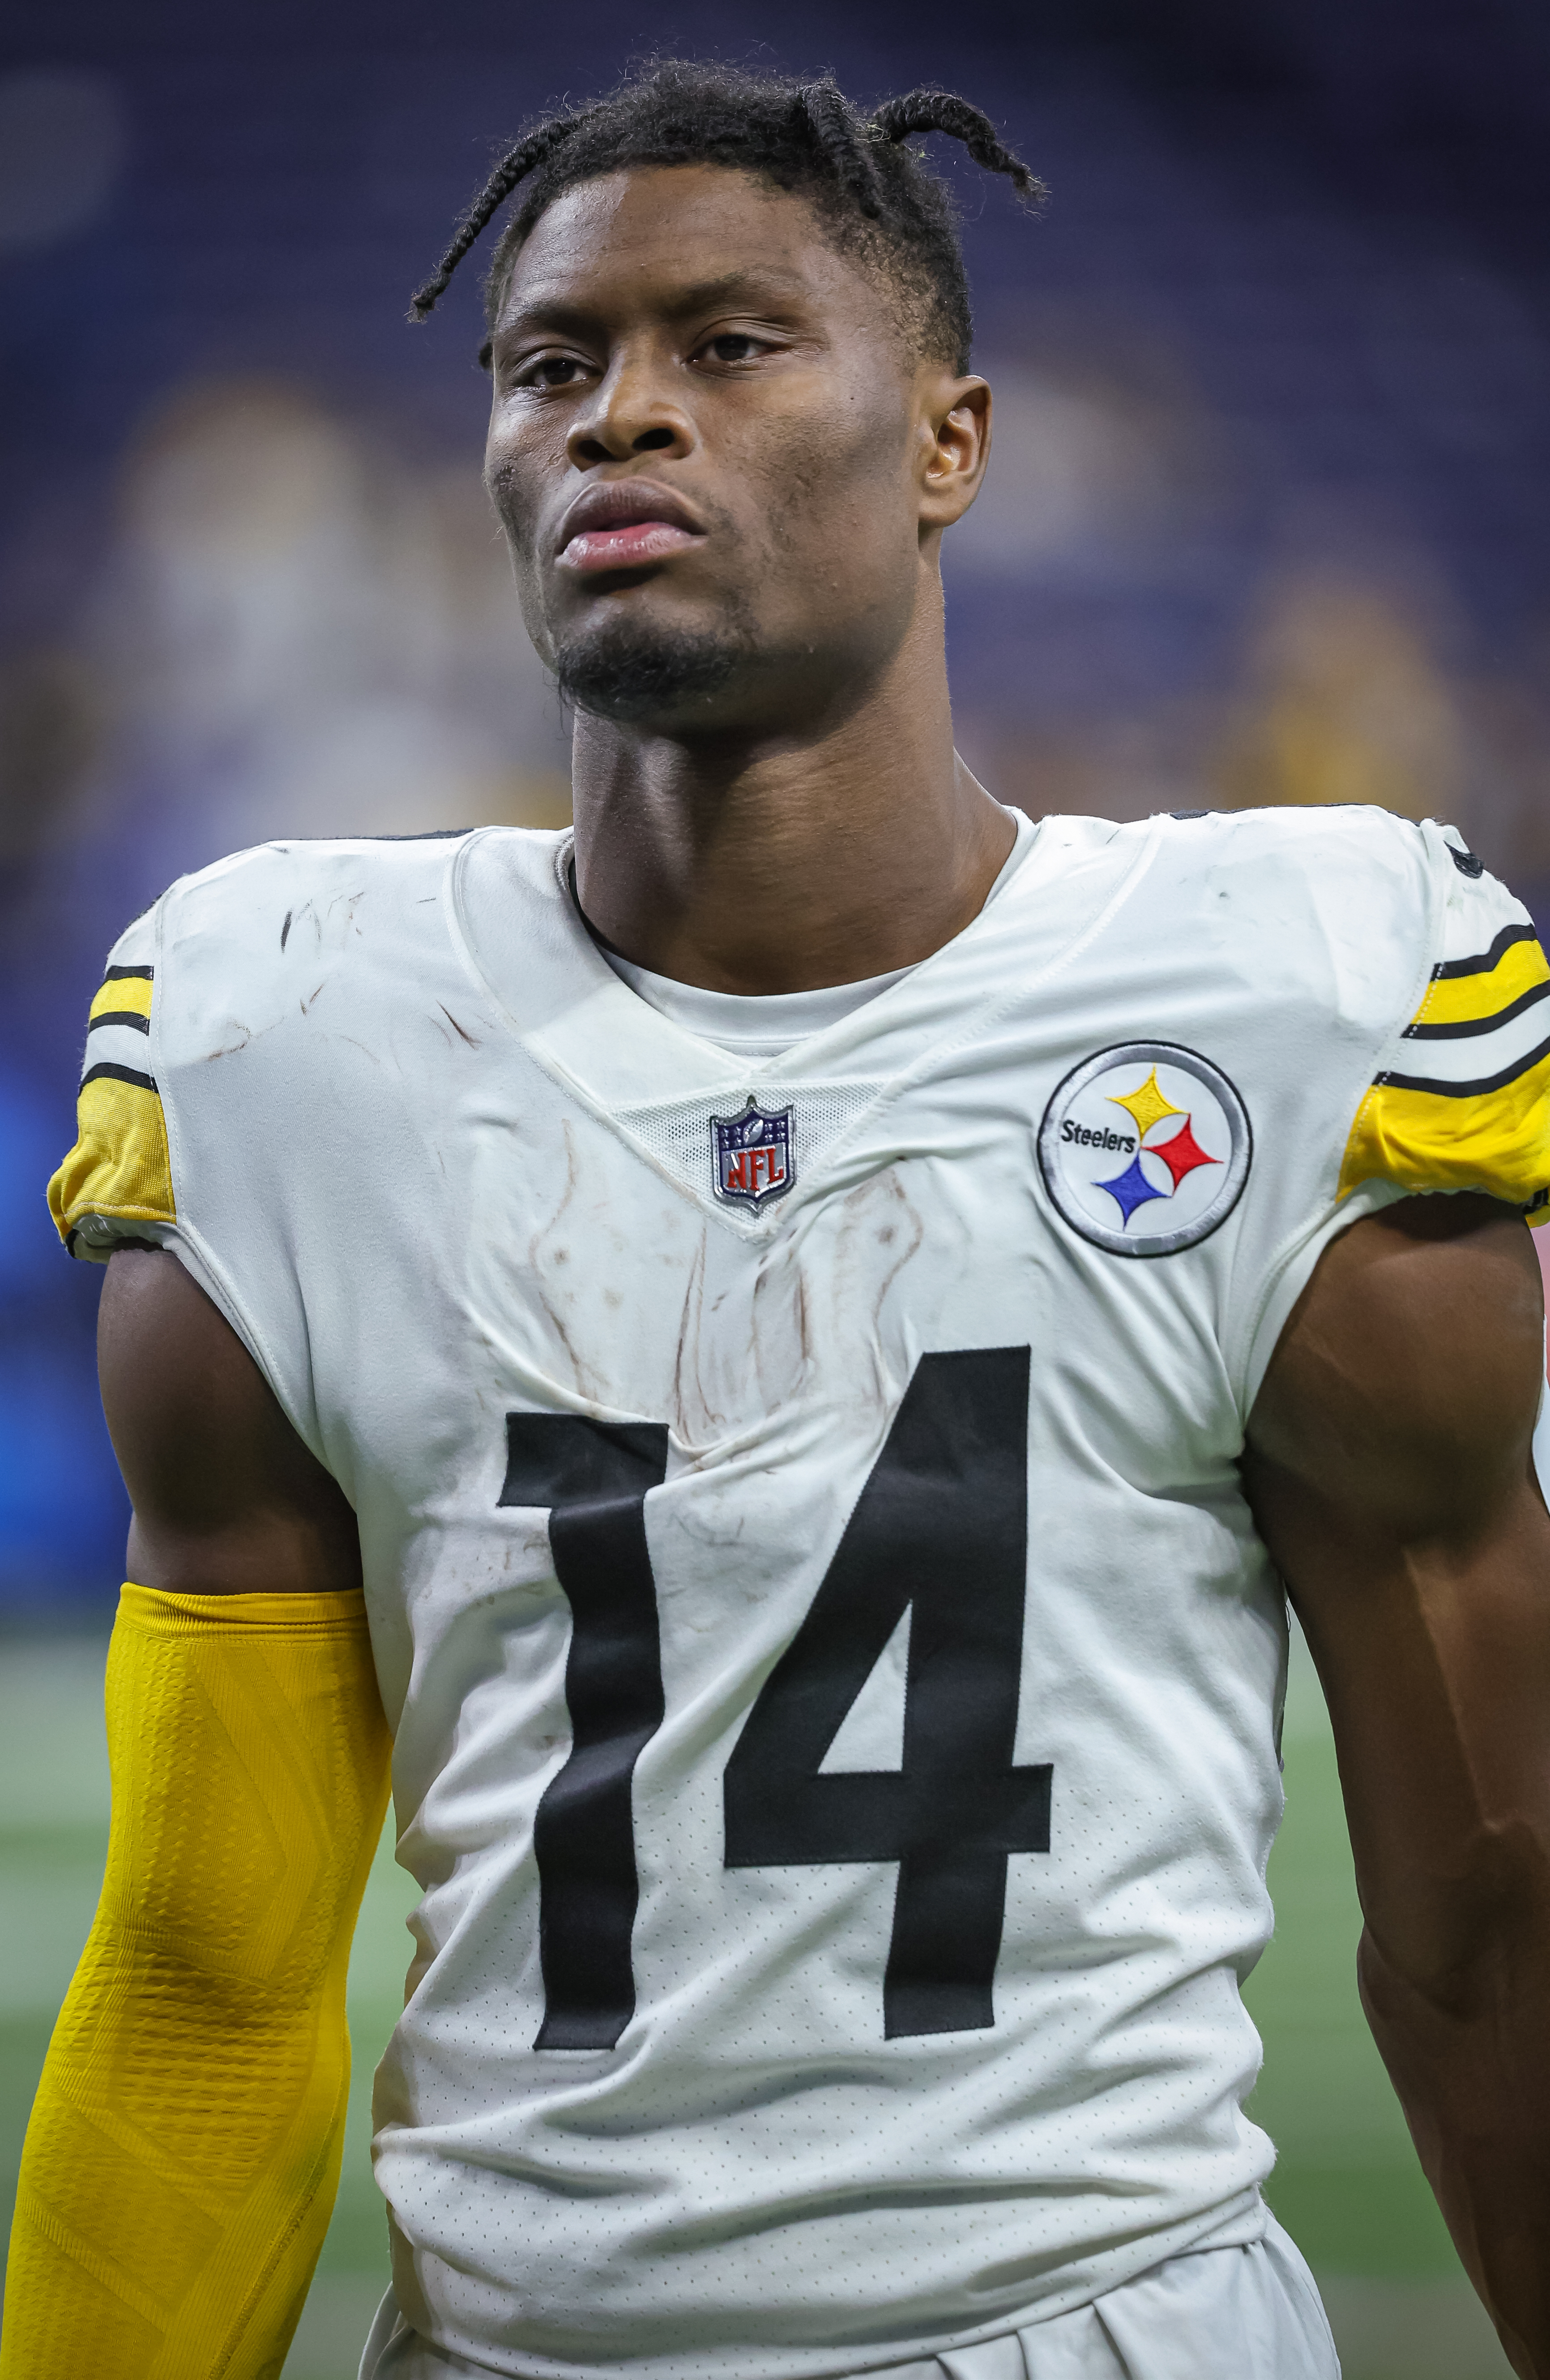 George Pickens #14 of the Pittsburgh Steelers is seen after the game against the Indianapolis Colts at Lucas Oil Stadium on November 28, 2022 in Indianapolis, Indiana.